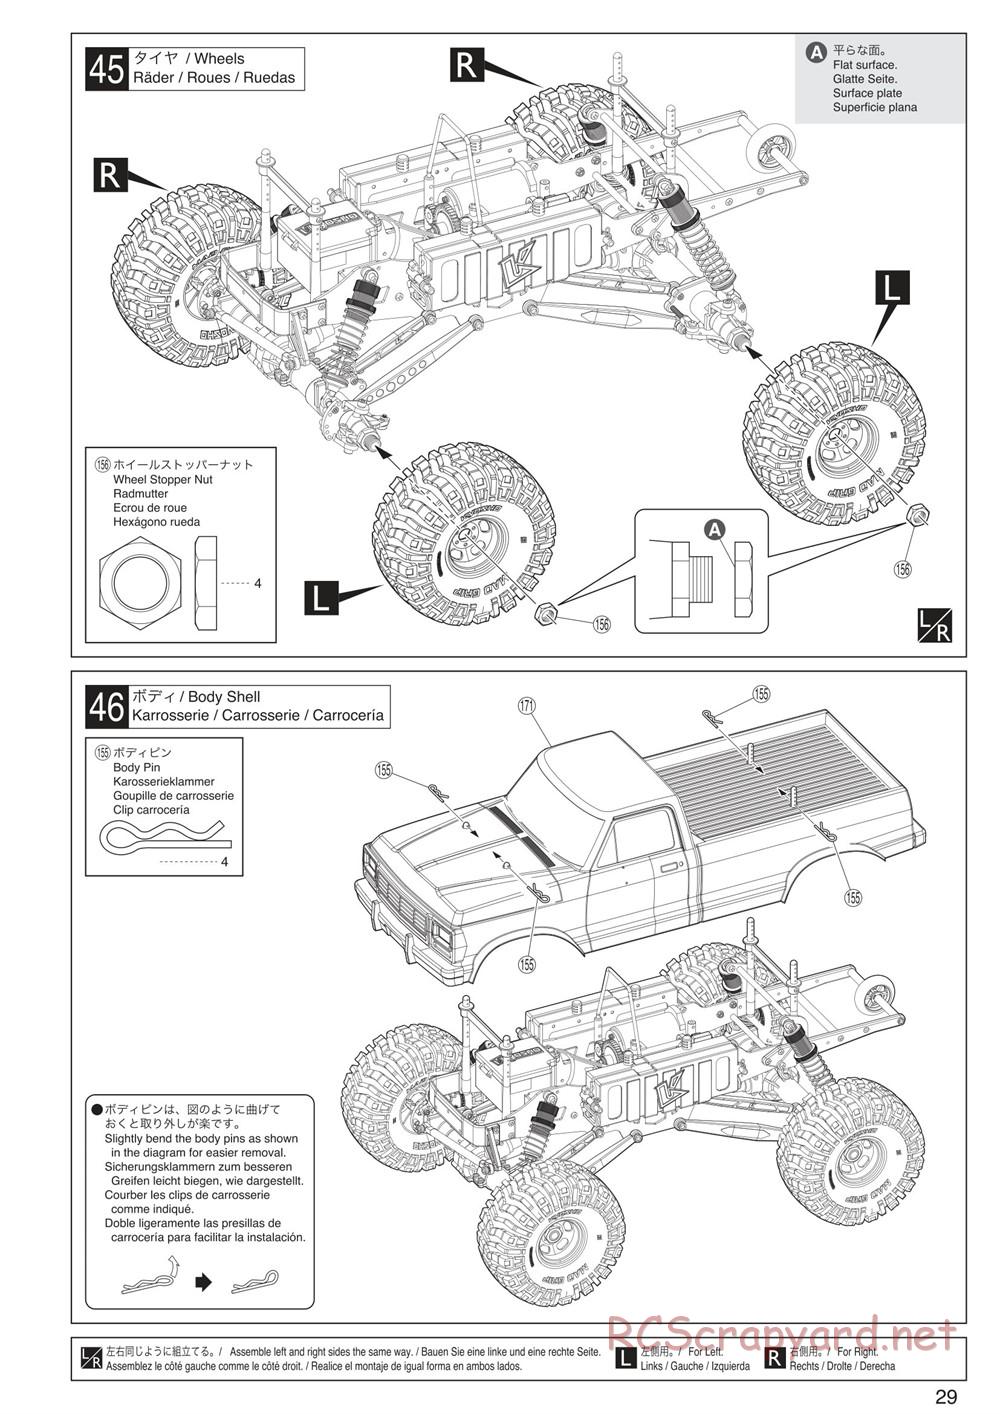 Kyosho - Mad Crusher VE - Manual - Page 29